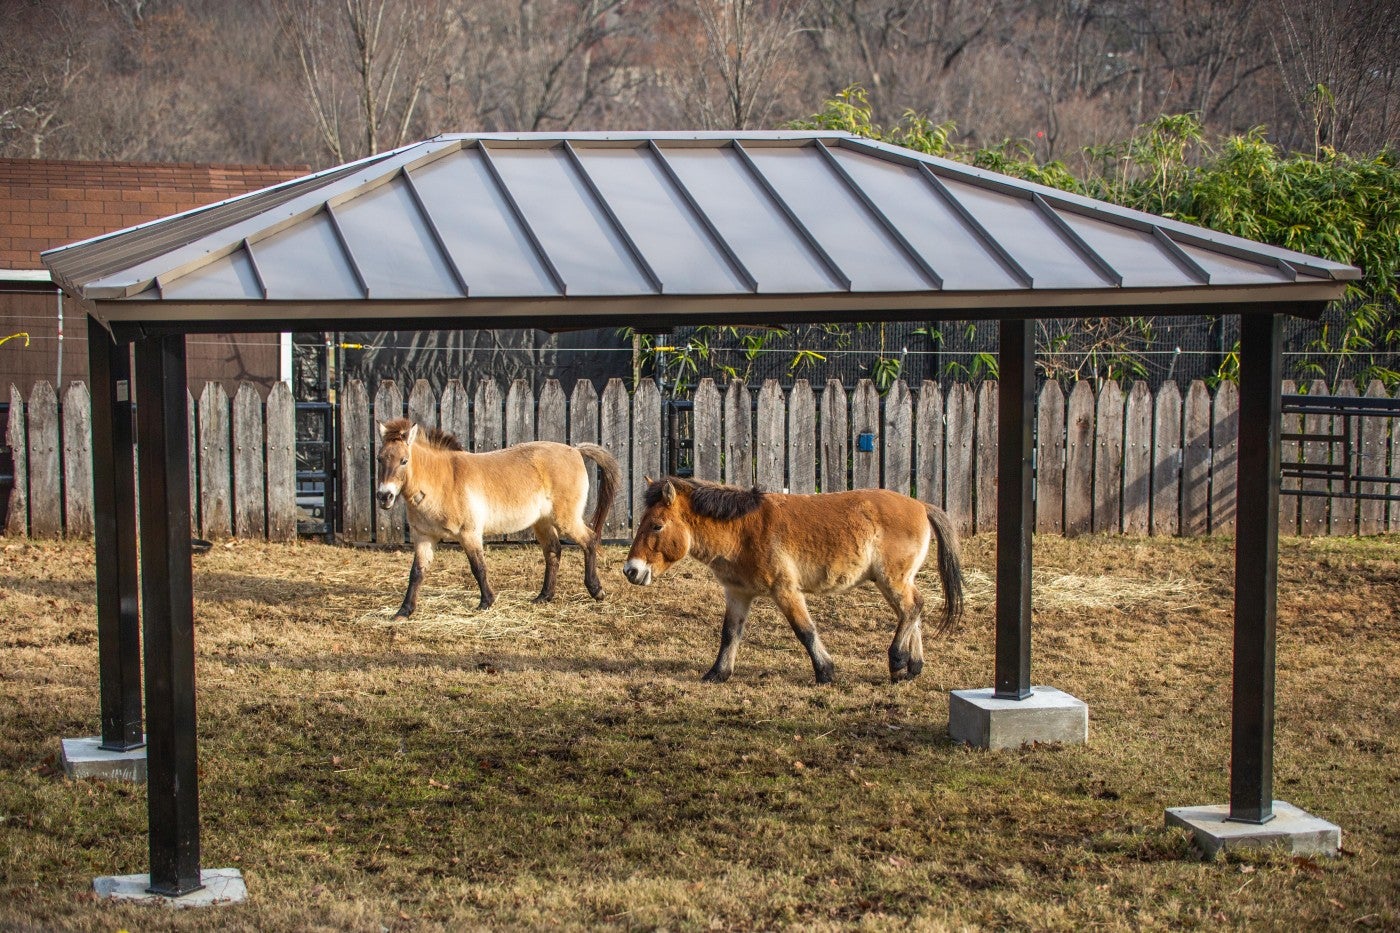 Przewalski's horses Barbie (left) and Cooper (right) walk through their habitat, behind a large shade structure.